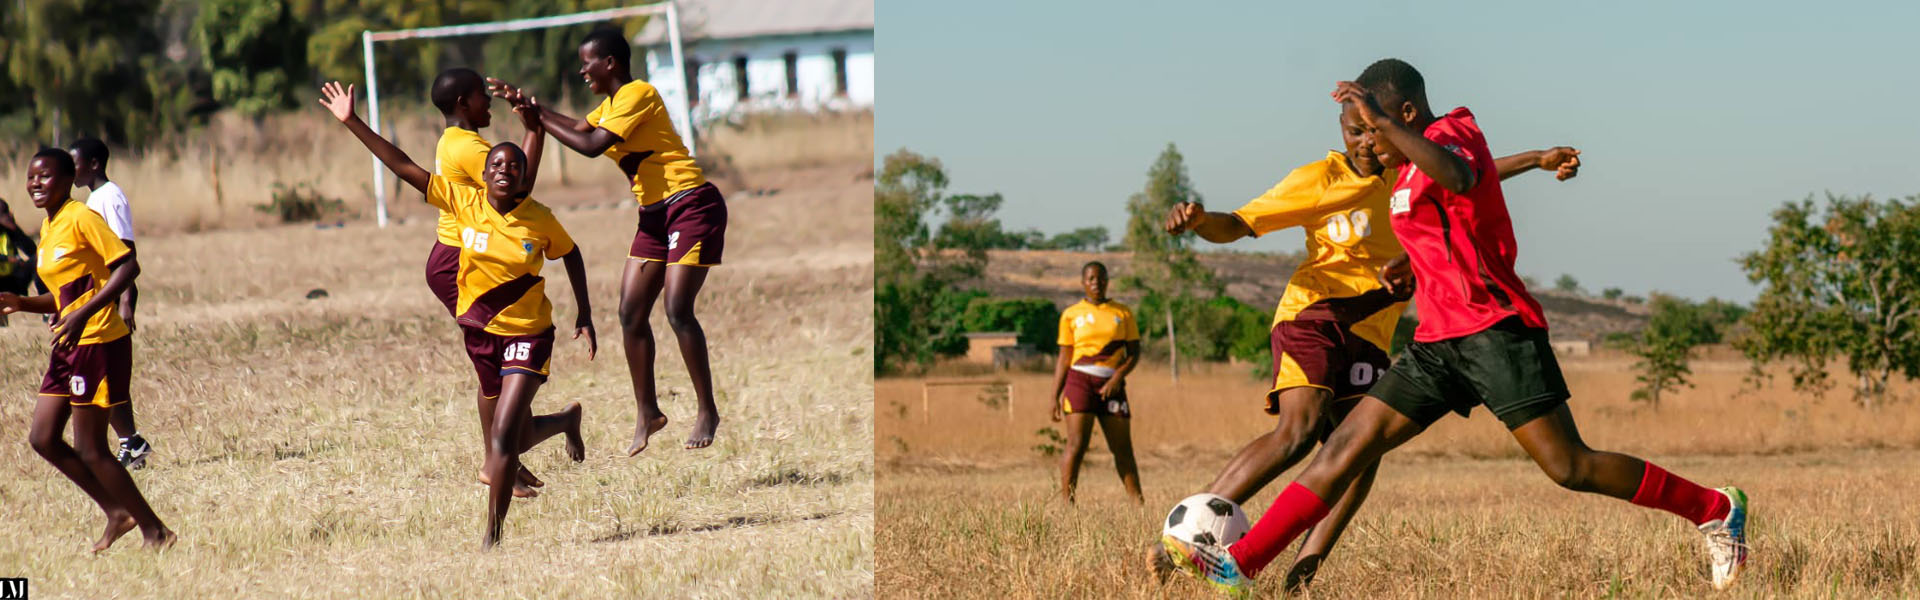 Image shows two different shots of the RMT Soccer Tournament